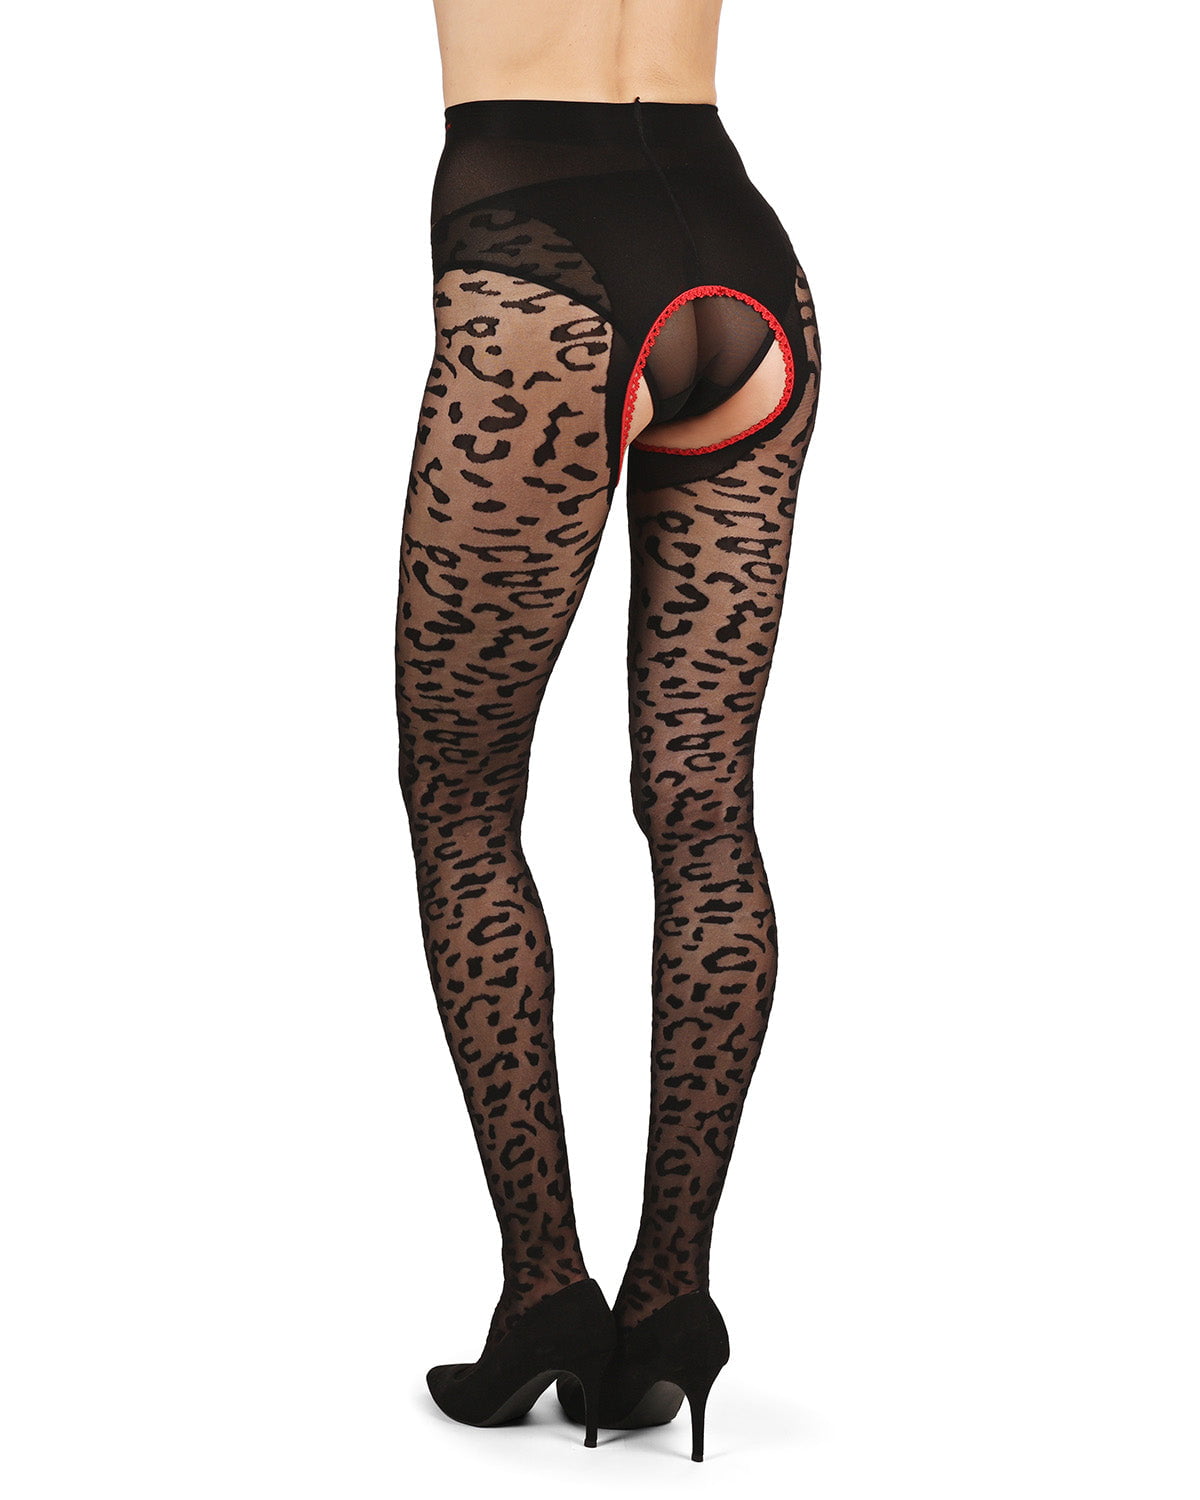 LoveMoi Women's Born To Be Wild Leopard Crotchless Sheer Pantyhose